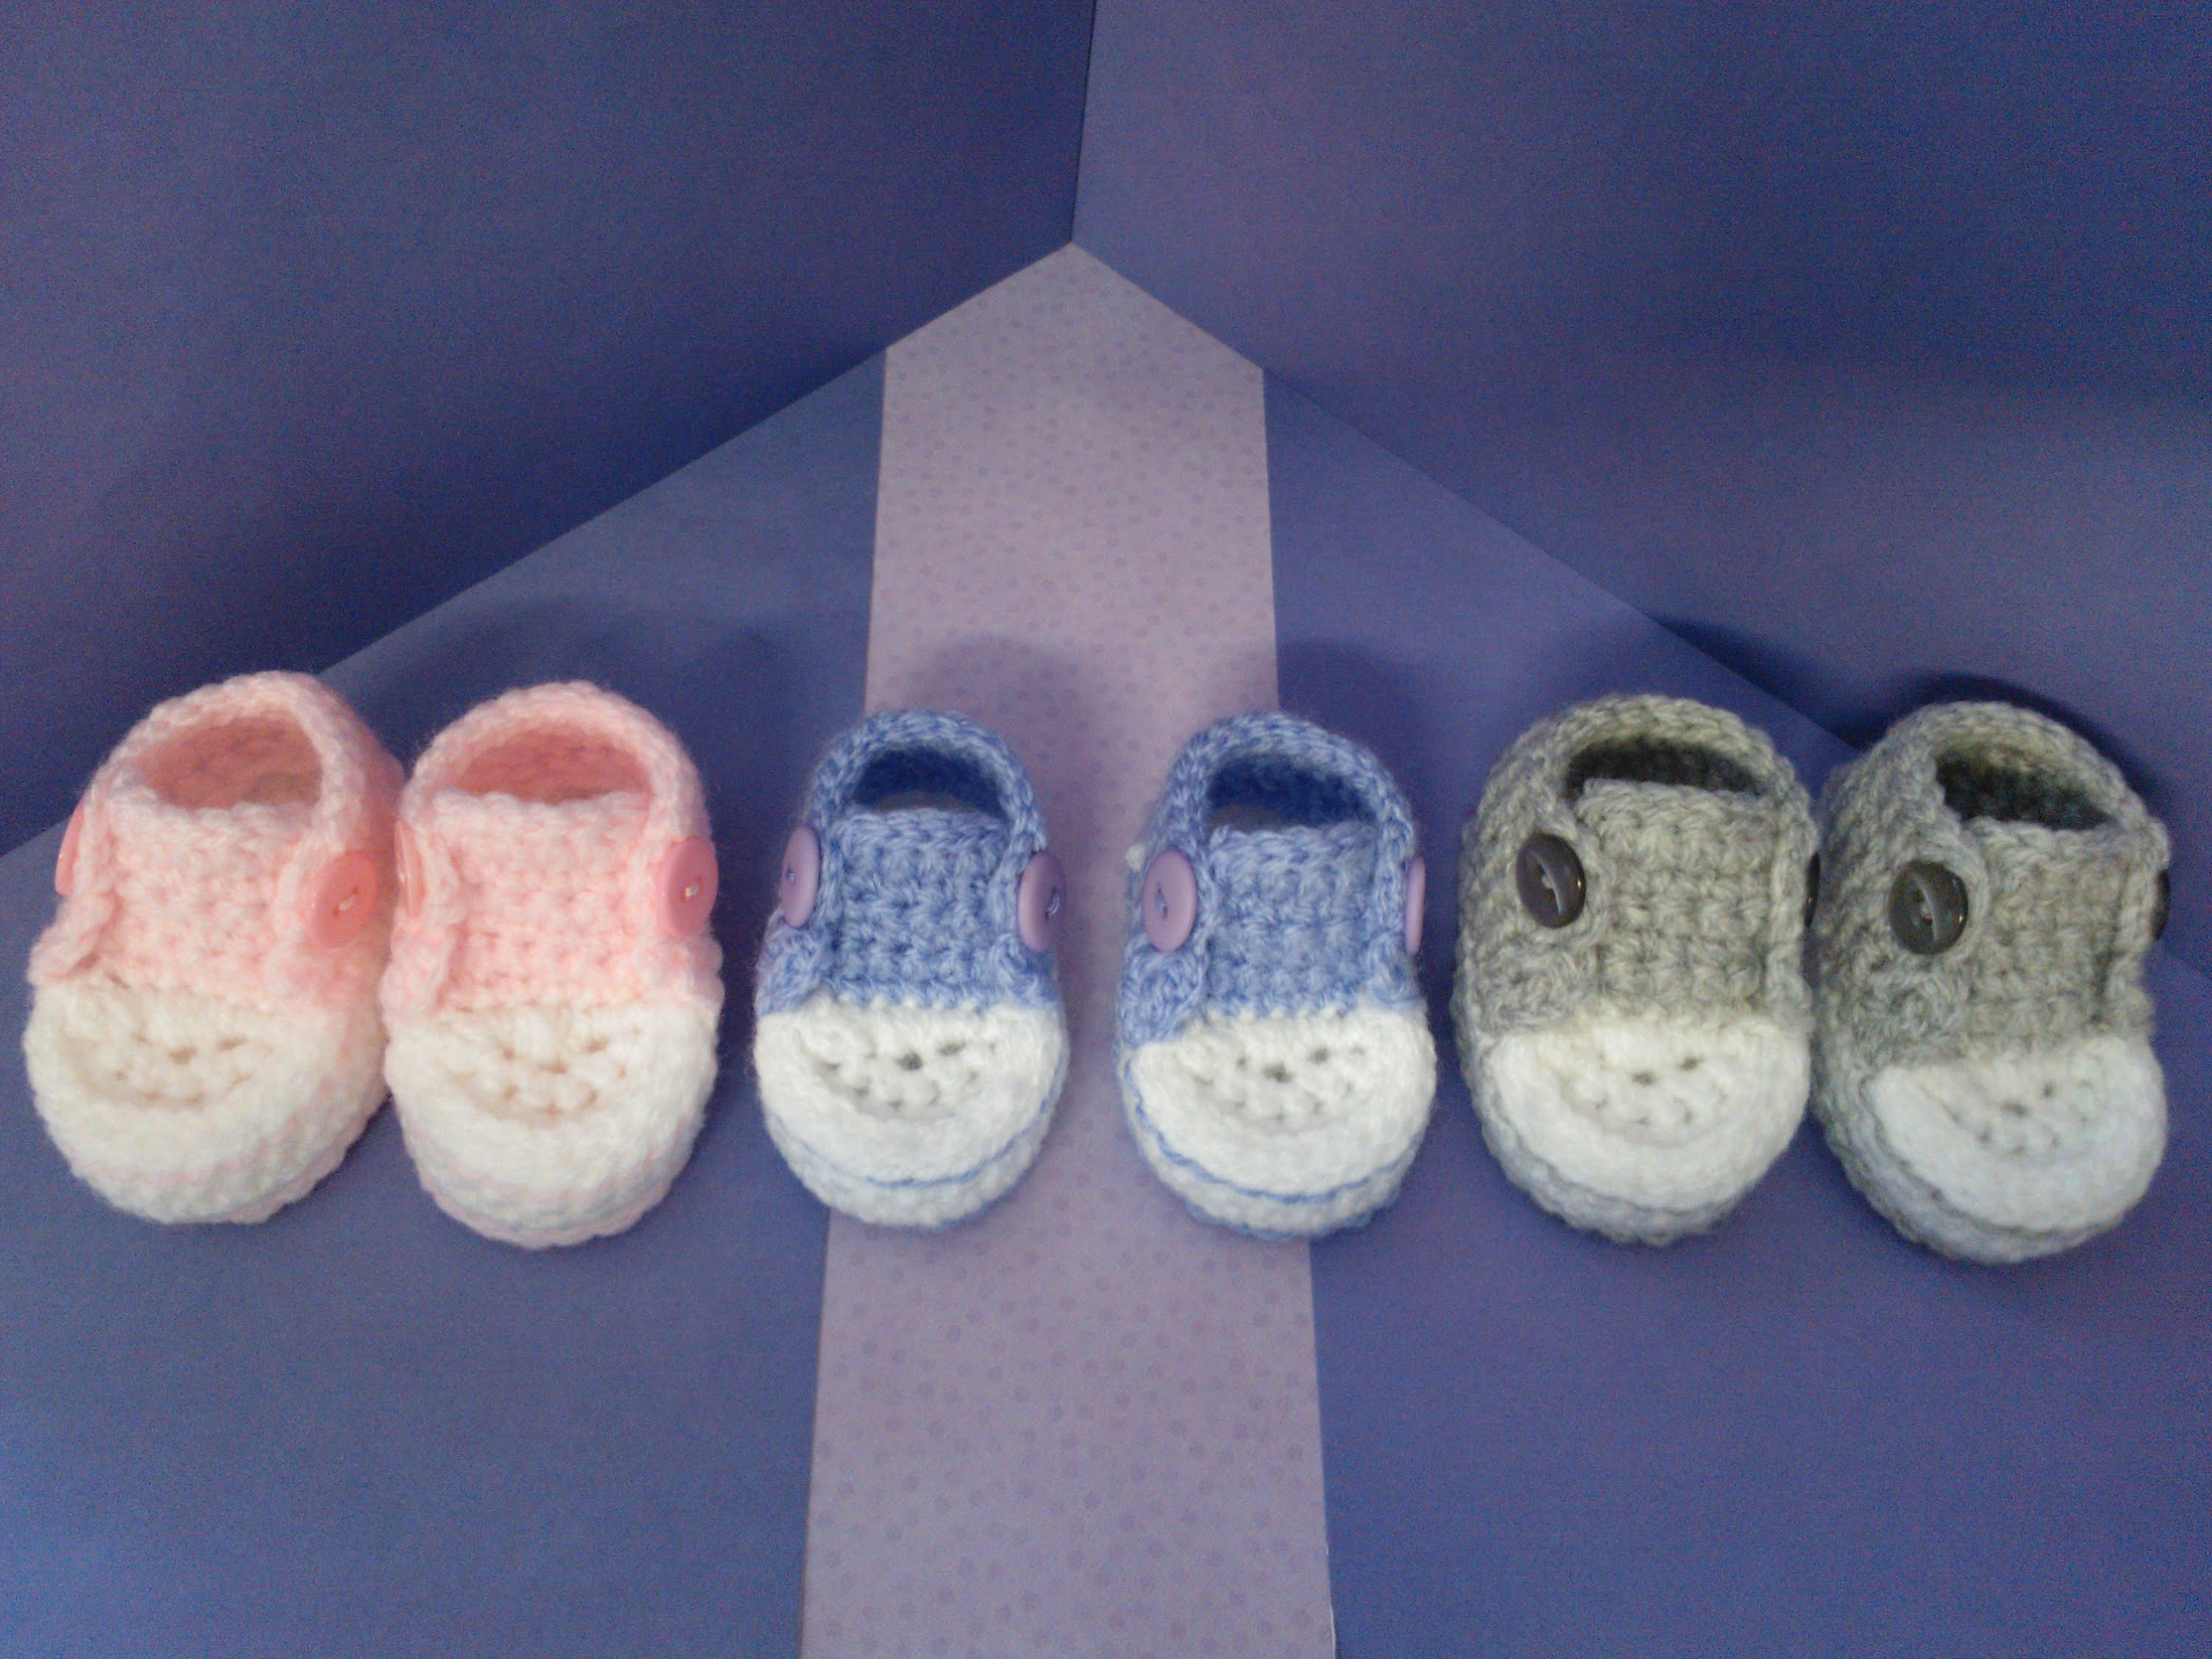 Converse Knitted Slippers Pattern Crochet Converse Slippers Pattern Free Knitting Patterns Slippers